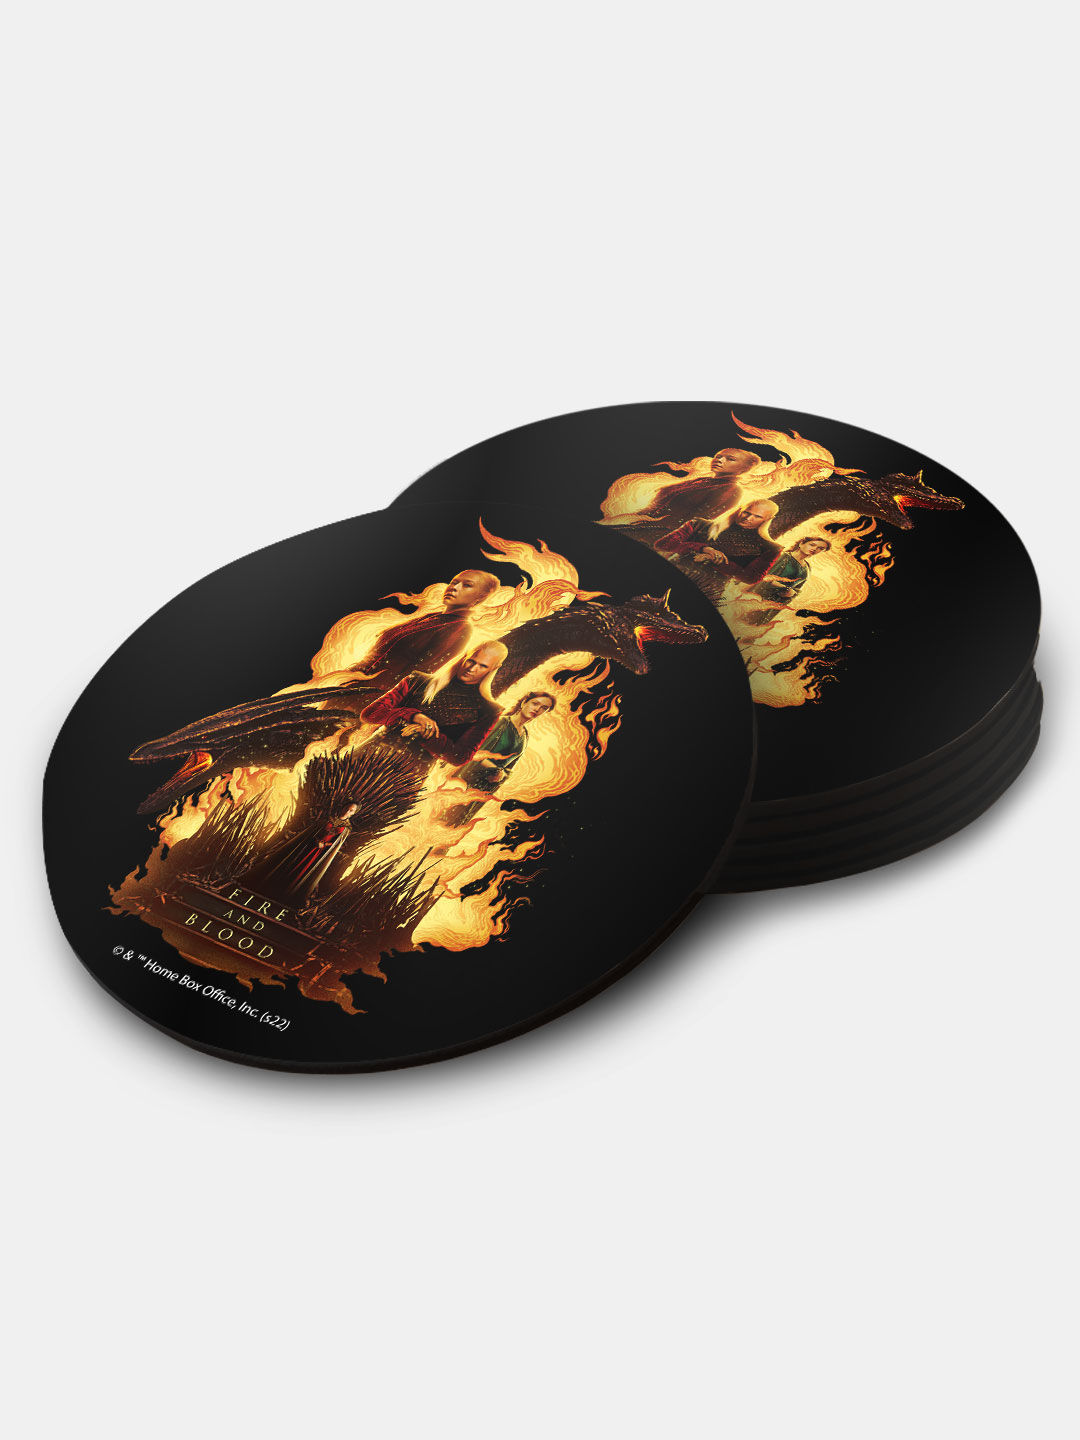 Buy HOD Fire and blood team Multi - Circular Coasters Coasters Online